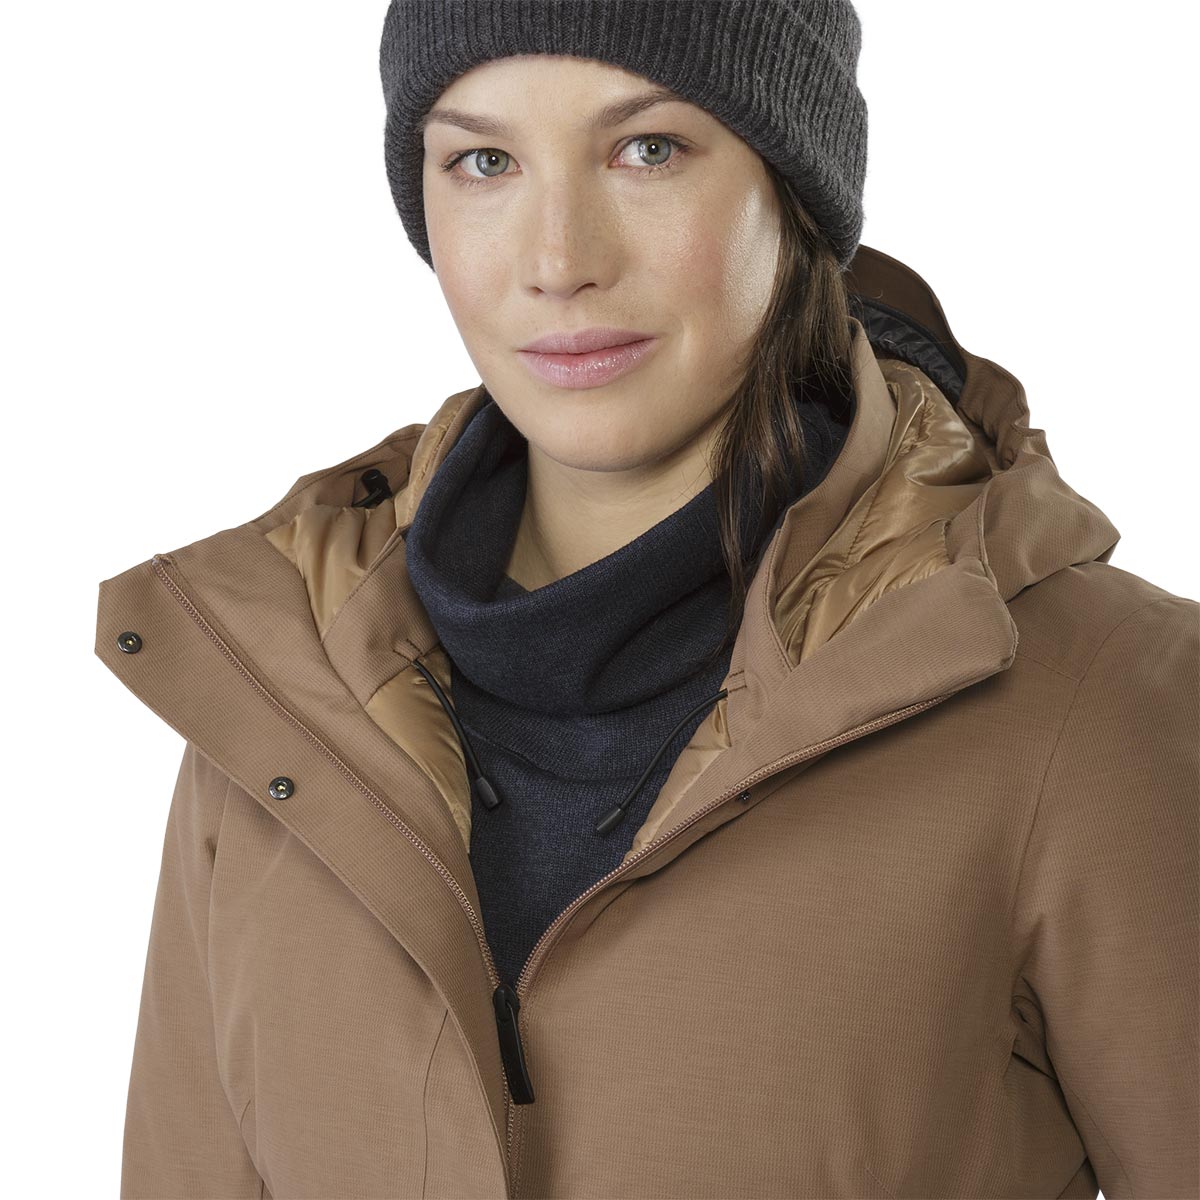 Arc'teryx Patera Parka, women's, discontinued Fall 2018 colors (free ...